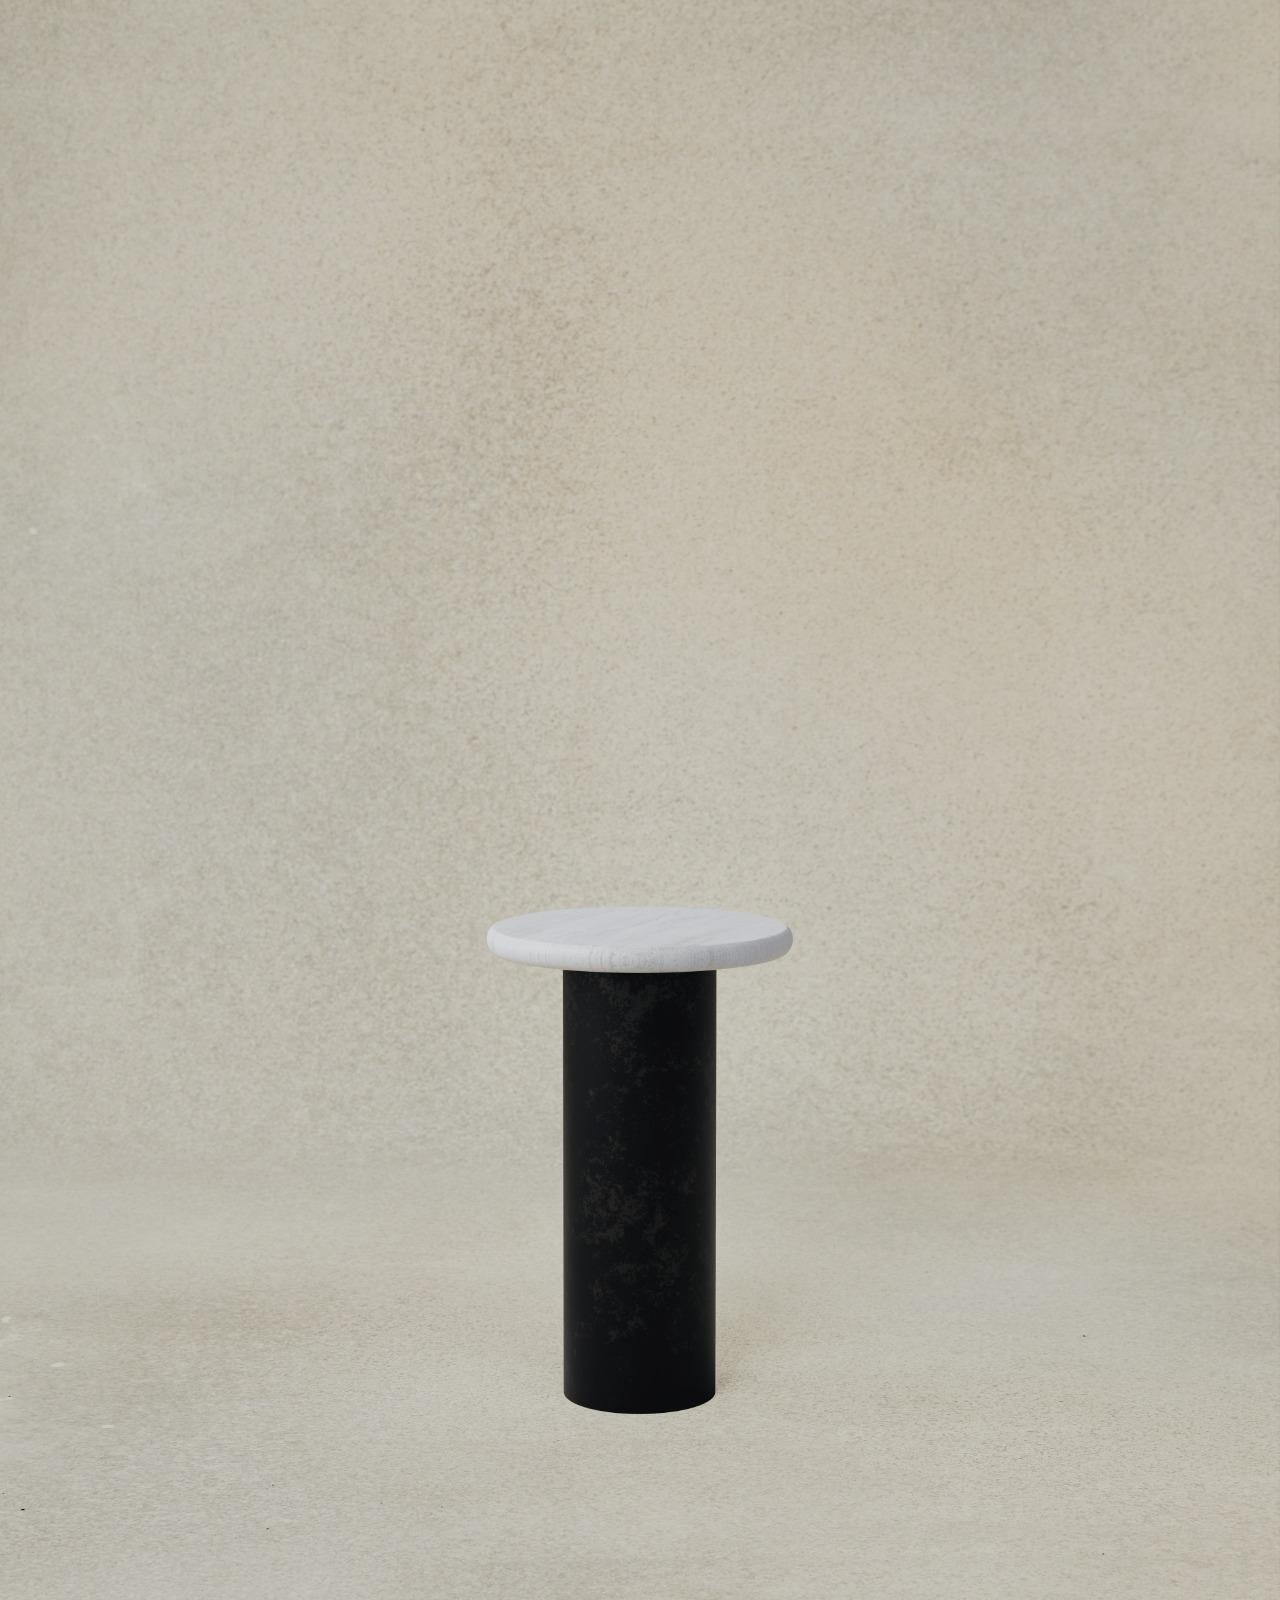 The raindrop 300 is the smallest and tallest raindrop we offer in the series, designed to be a side table or bedside table for your home and now available in a range of finishes to suit any interior or style. The raindrops nestle together to form a